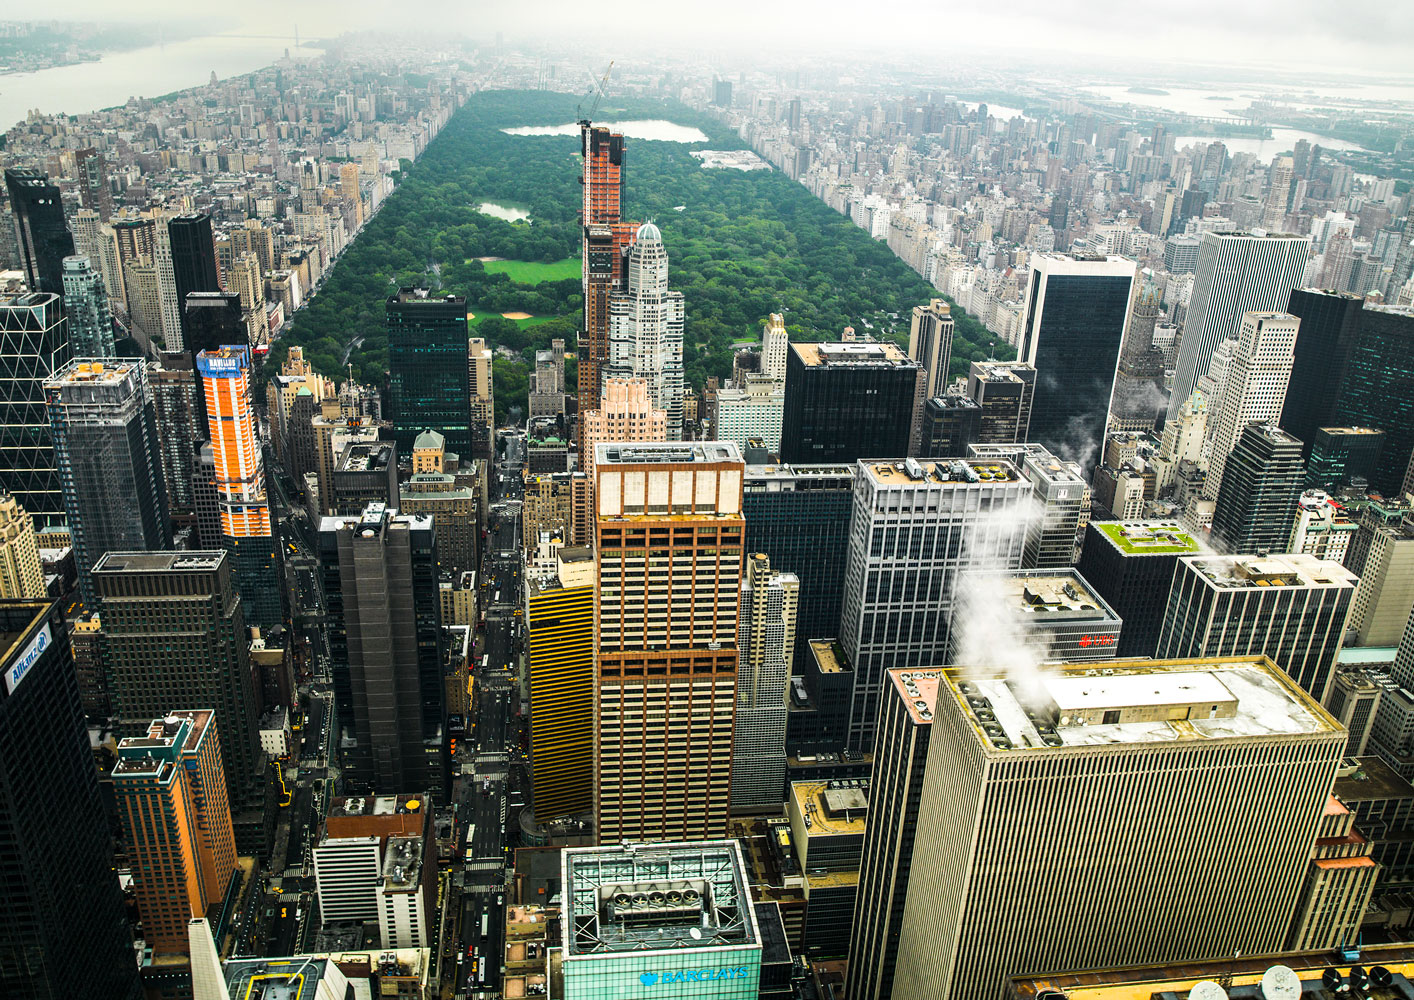 photography with the title 'NYC Rooftops 7'. Capture of Midtown Manhattan, with the Central Park in the Background.